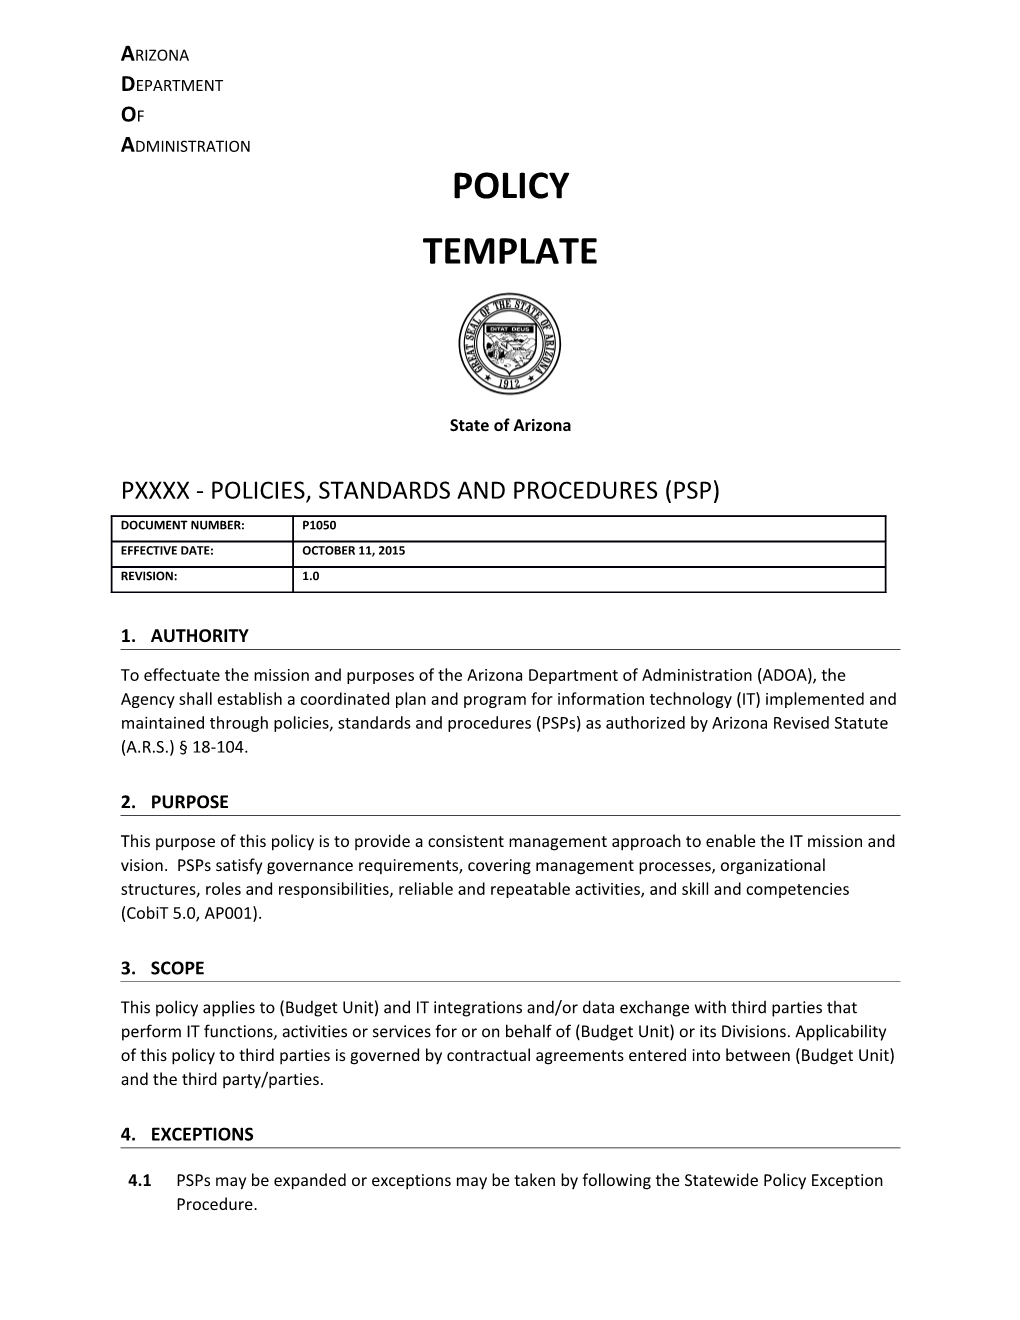 P1050 Policy, Standard and Procedure Policy